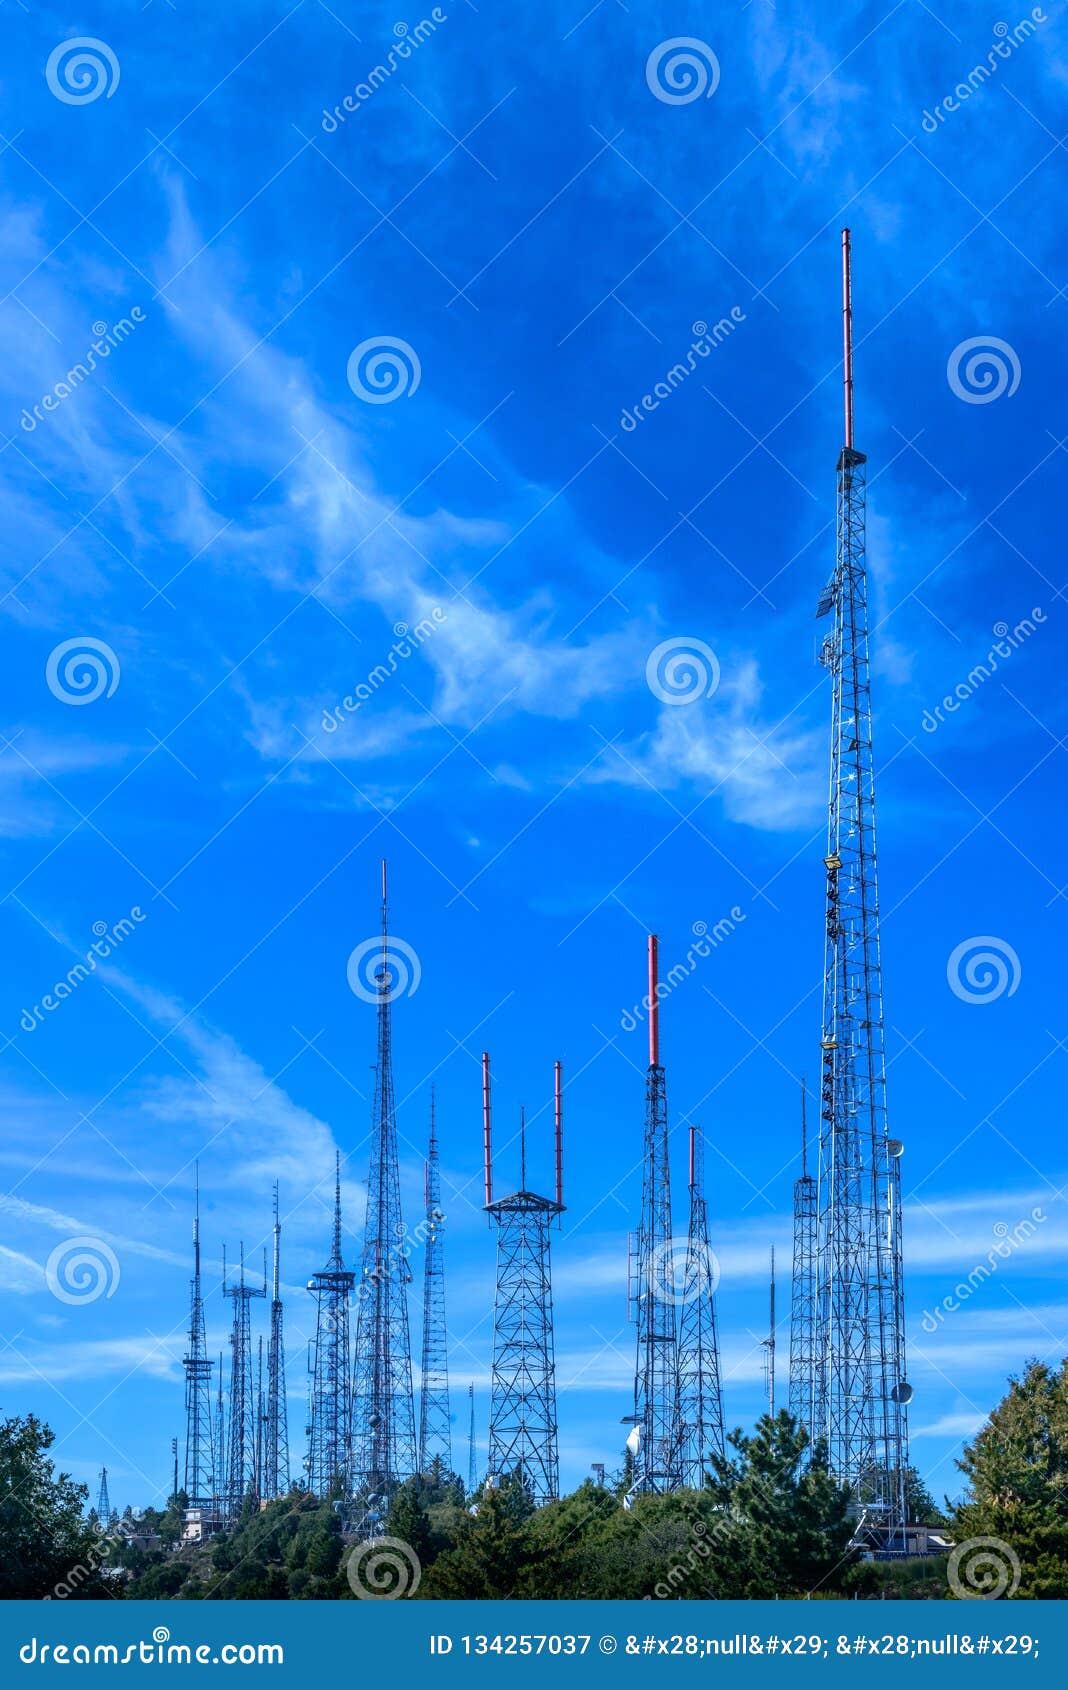 Radio and Television Broadcast Towers Stock Image - Image of towers